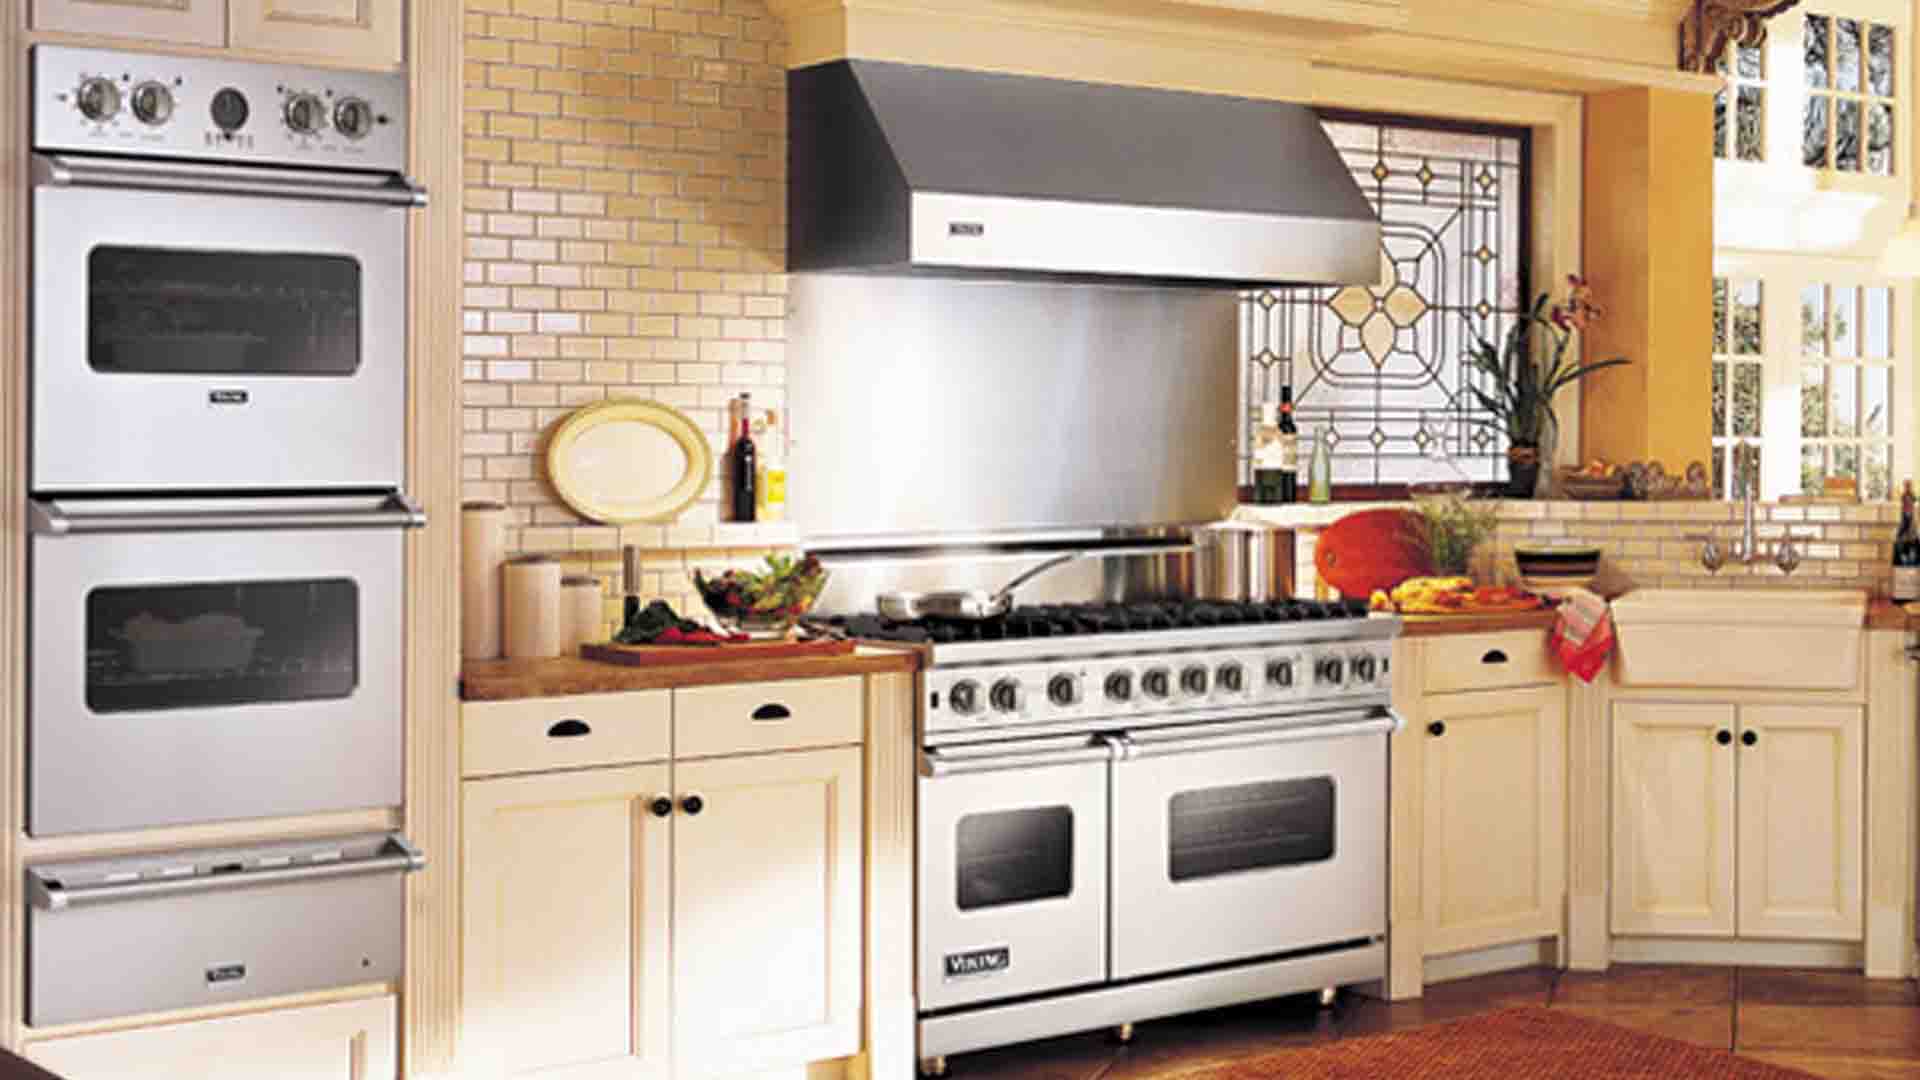 Viking Electric Double Oven Repair Service | Viking Appliance Repairs